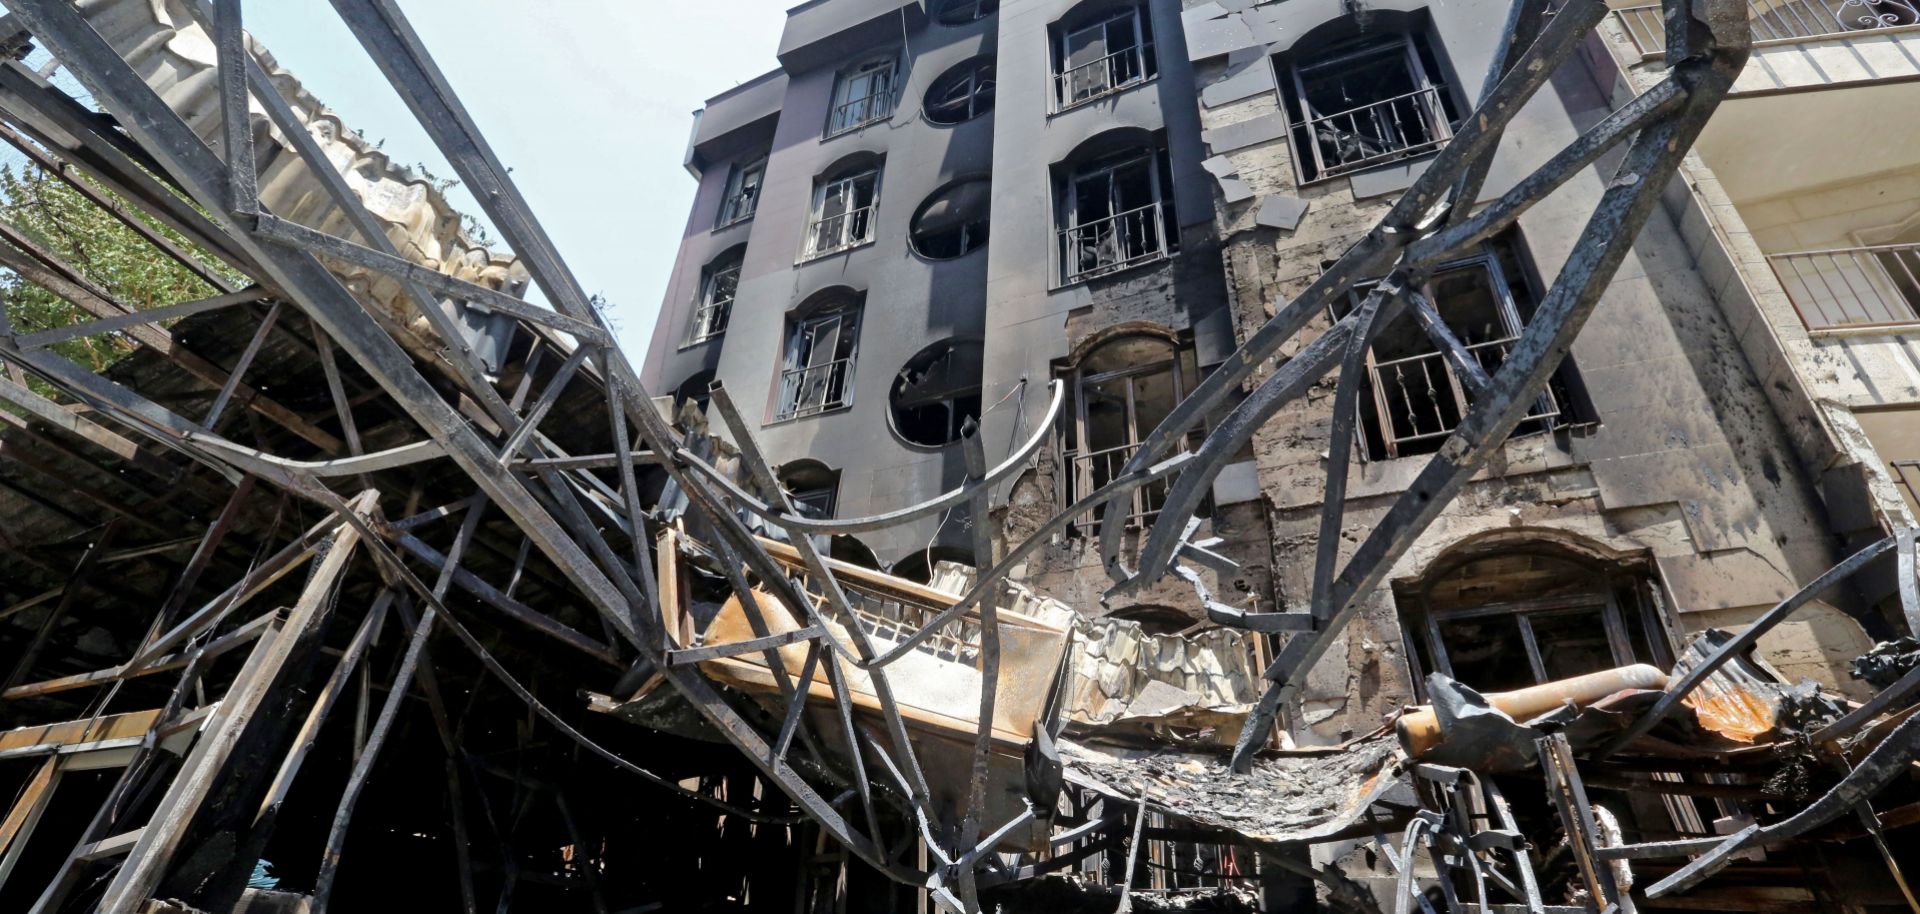 A photo shows the site of a recent gas explosion at the Sina Medical Center in Tehran, Iran, on July 1, 2020. 19 people were killed in the blast.